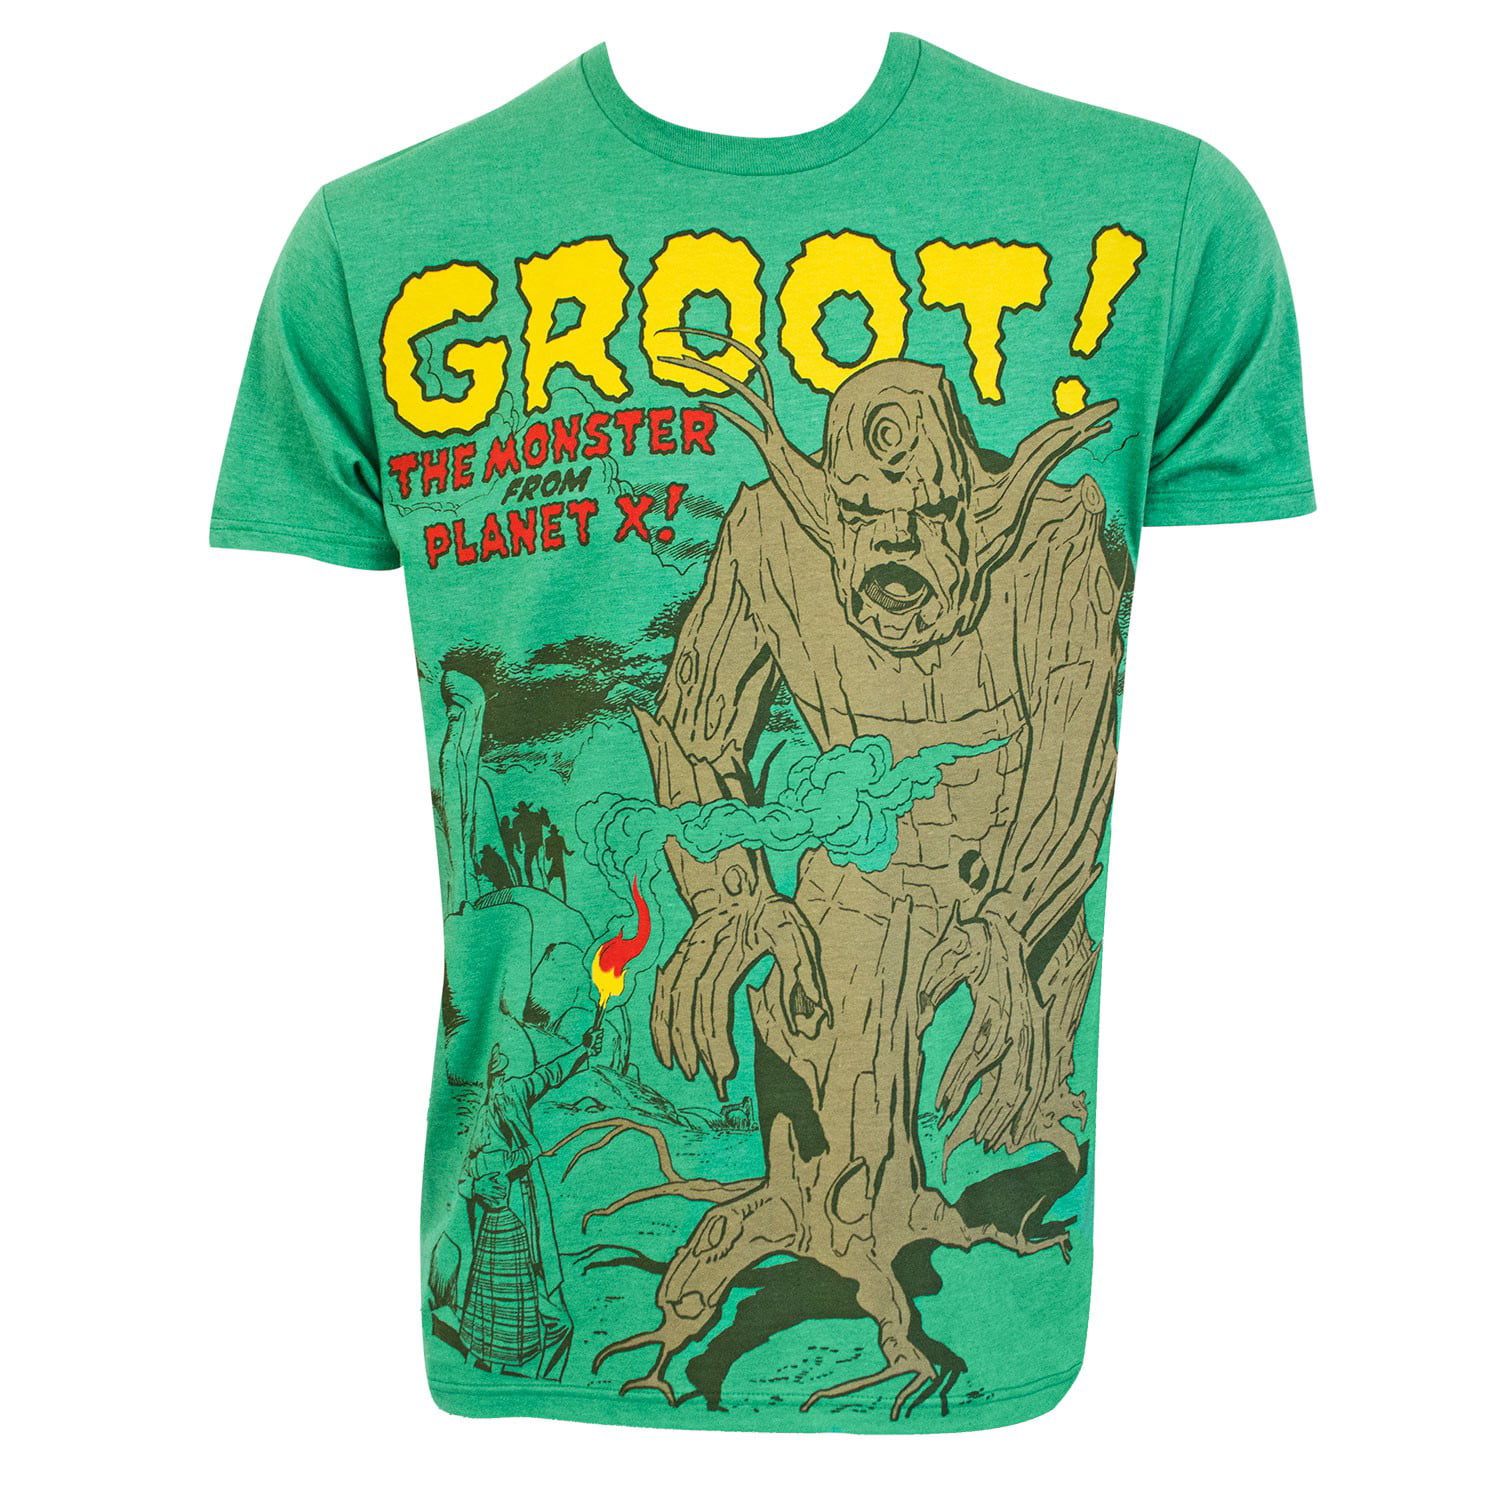 GUARDIANS 5 CHARACTERS MENS T SHIRT TEE GALAXY GROOT TOP STAR LORD COOL FILM NEW